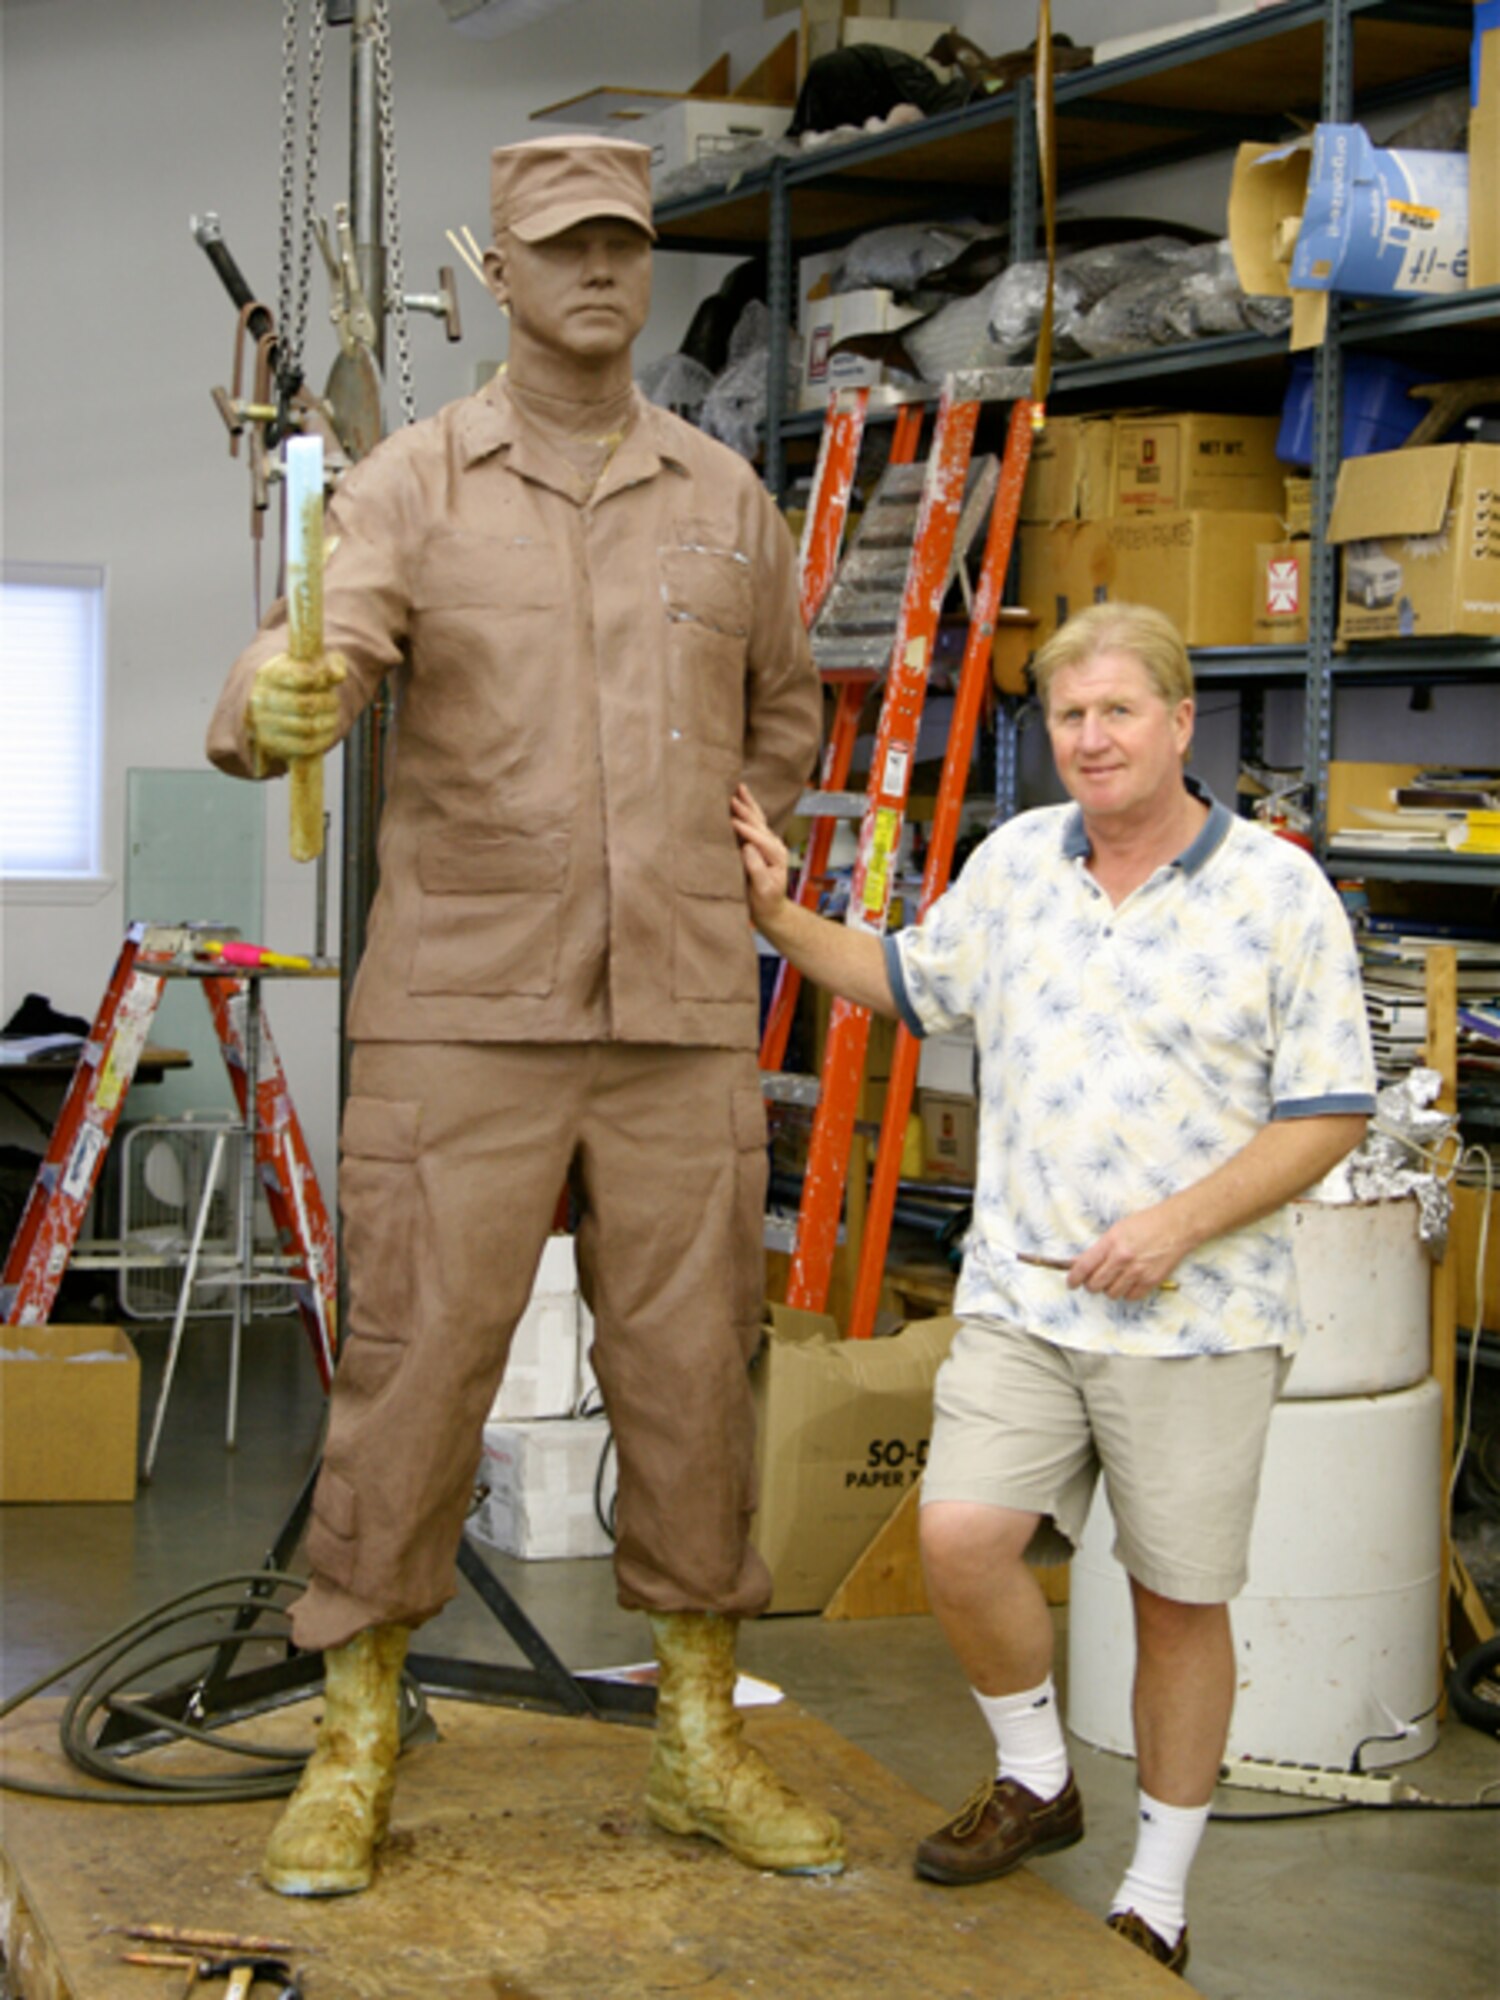 Michael Maiden, sculptor, works on the yet unfinished male first sergeant statue at his studio in Oregon. For the finished memorial, this statue will be joined by a female first sergeant statue and located at the Enlisted Heritage Hall museum at Gunter Air Force Base, Al. (Courtesy Photo)